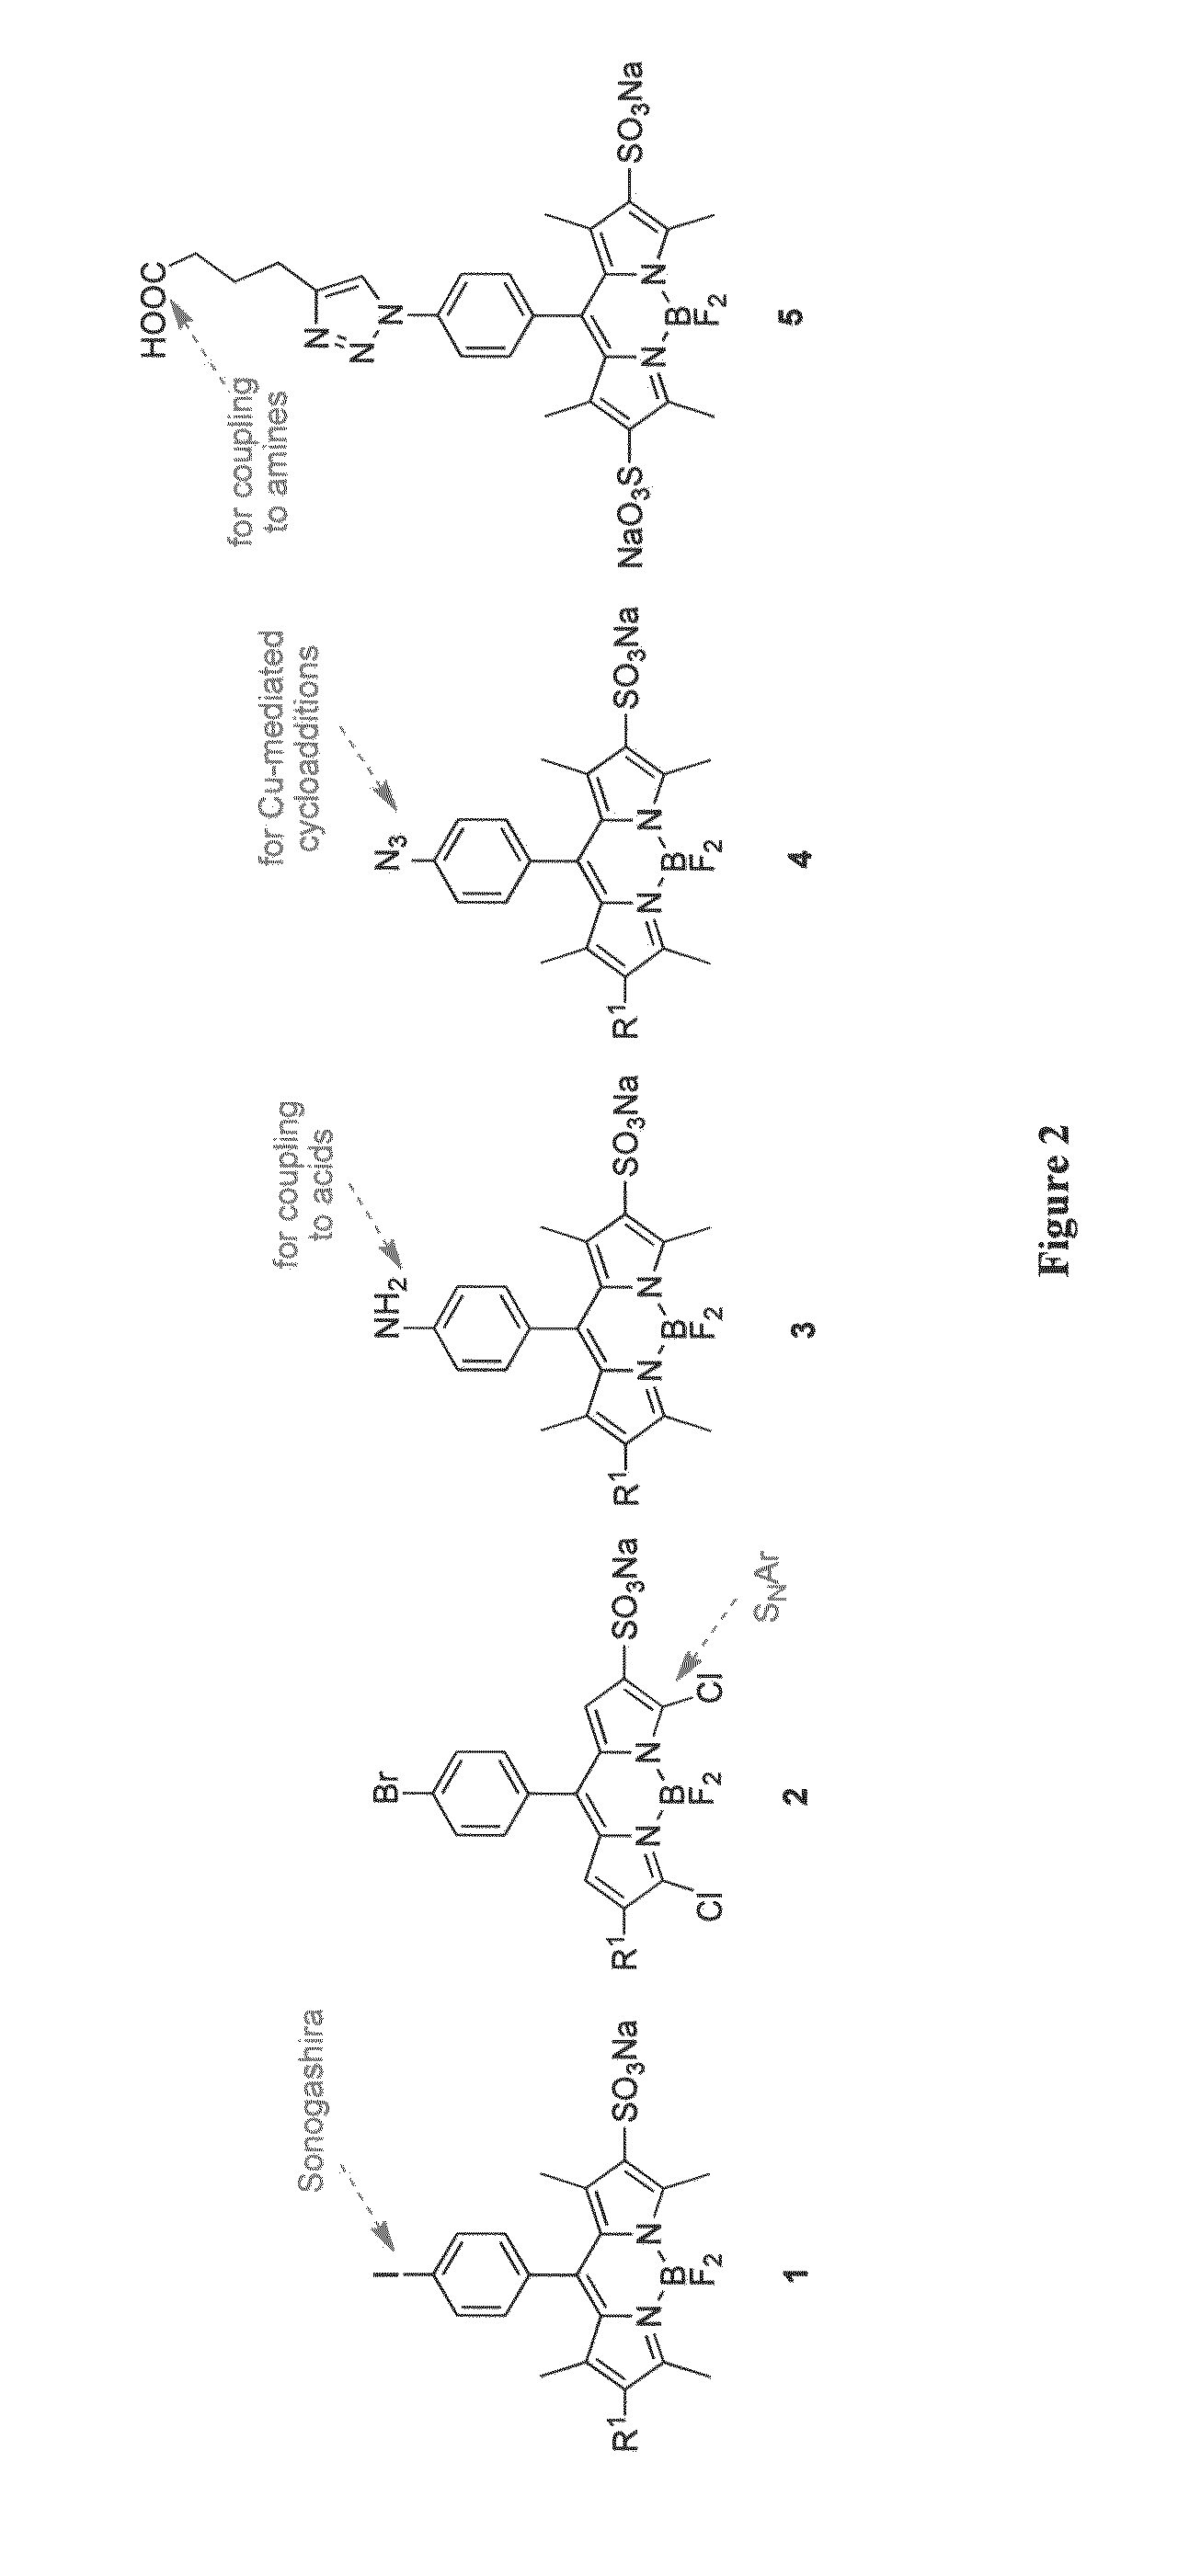 Through-bond energy transfer cassettes, systems and methods